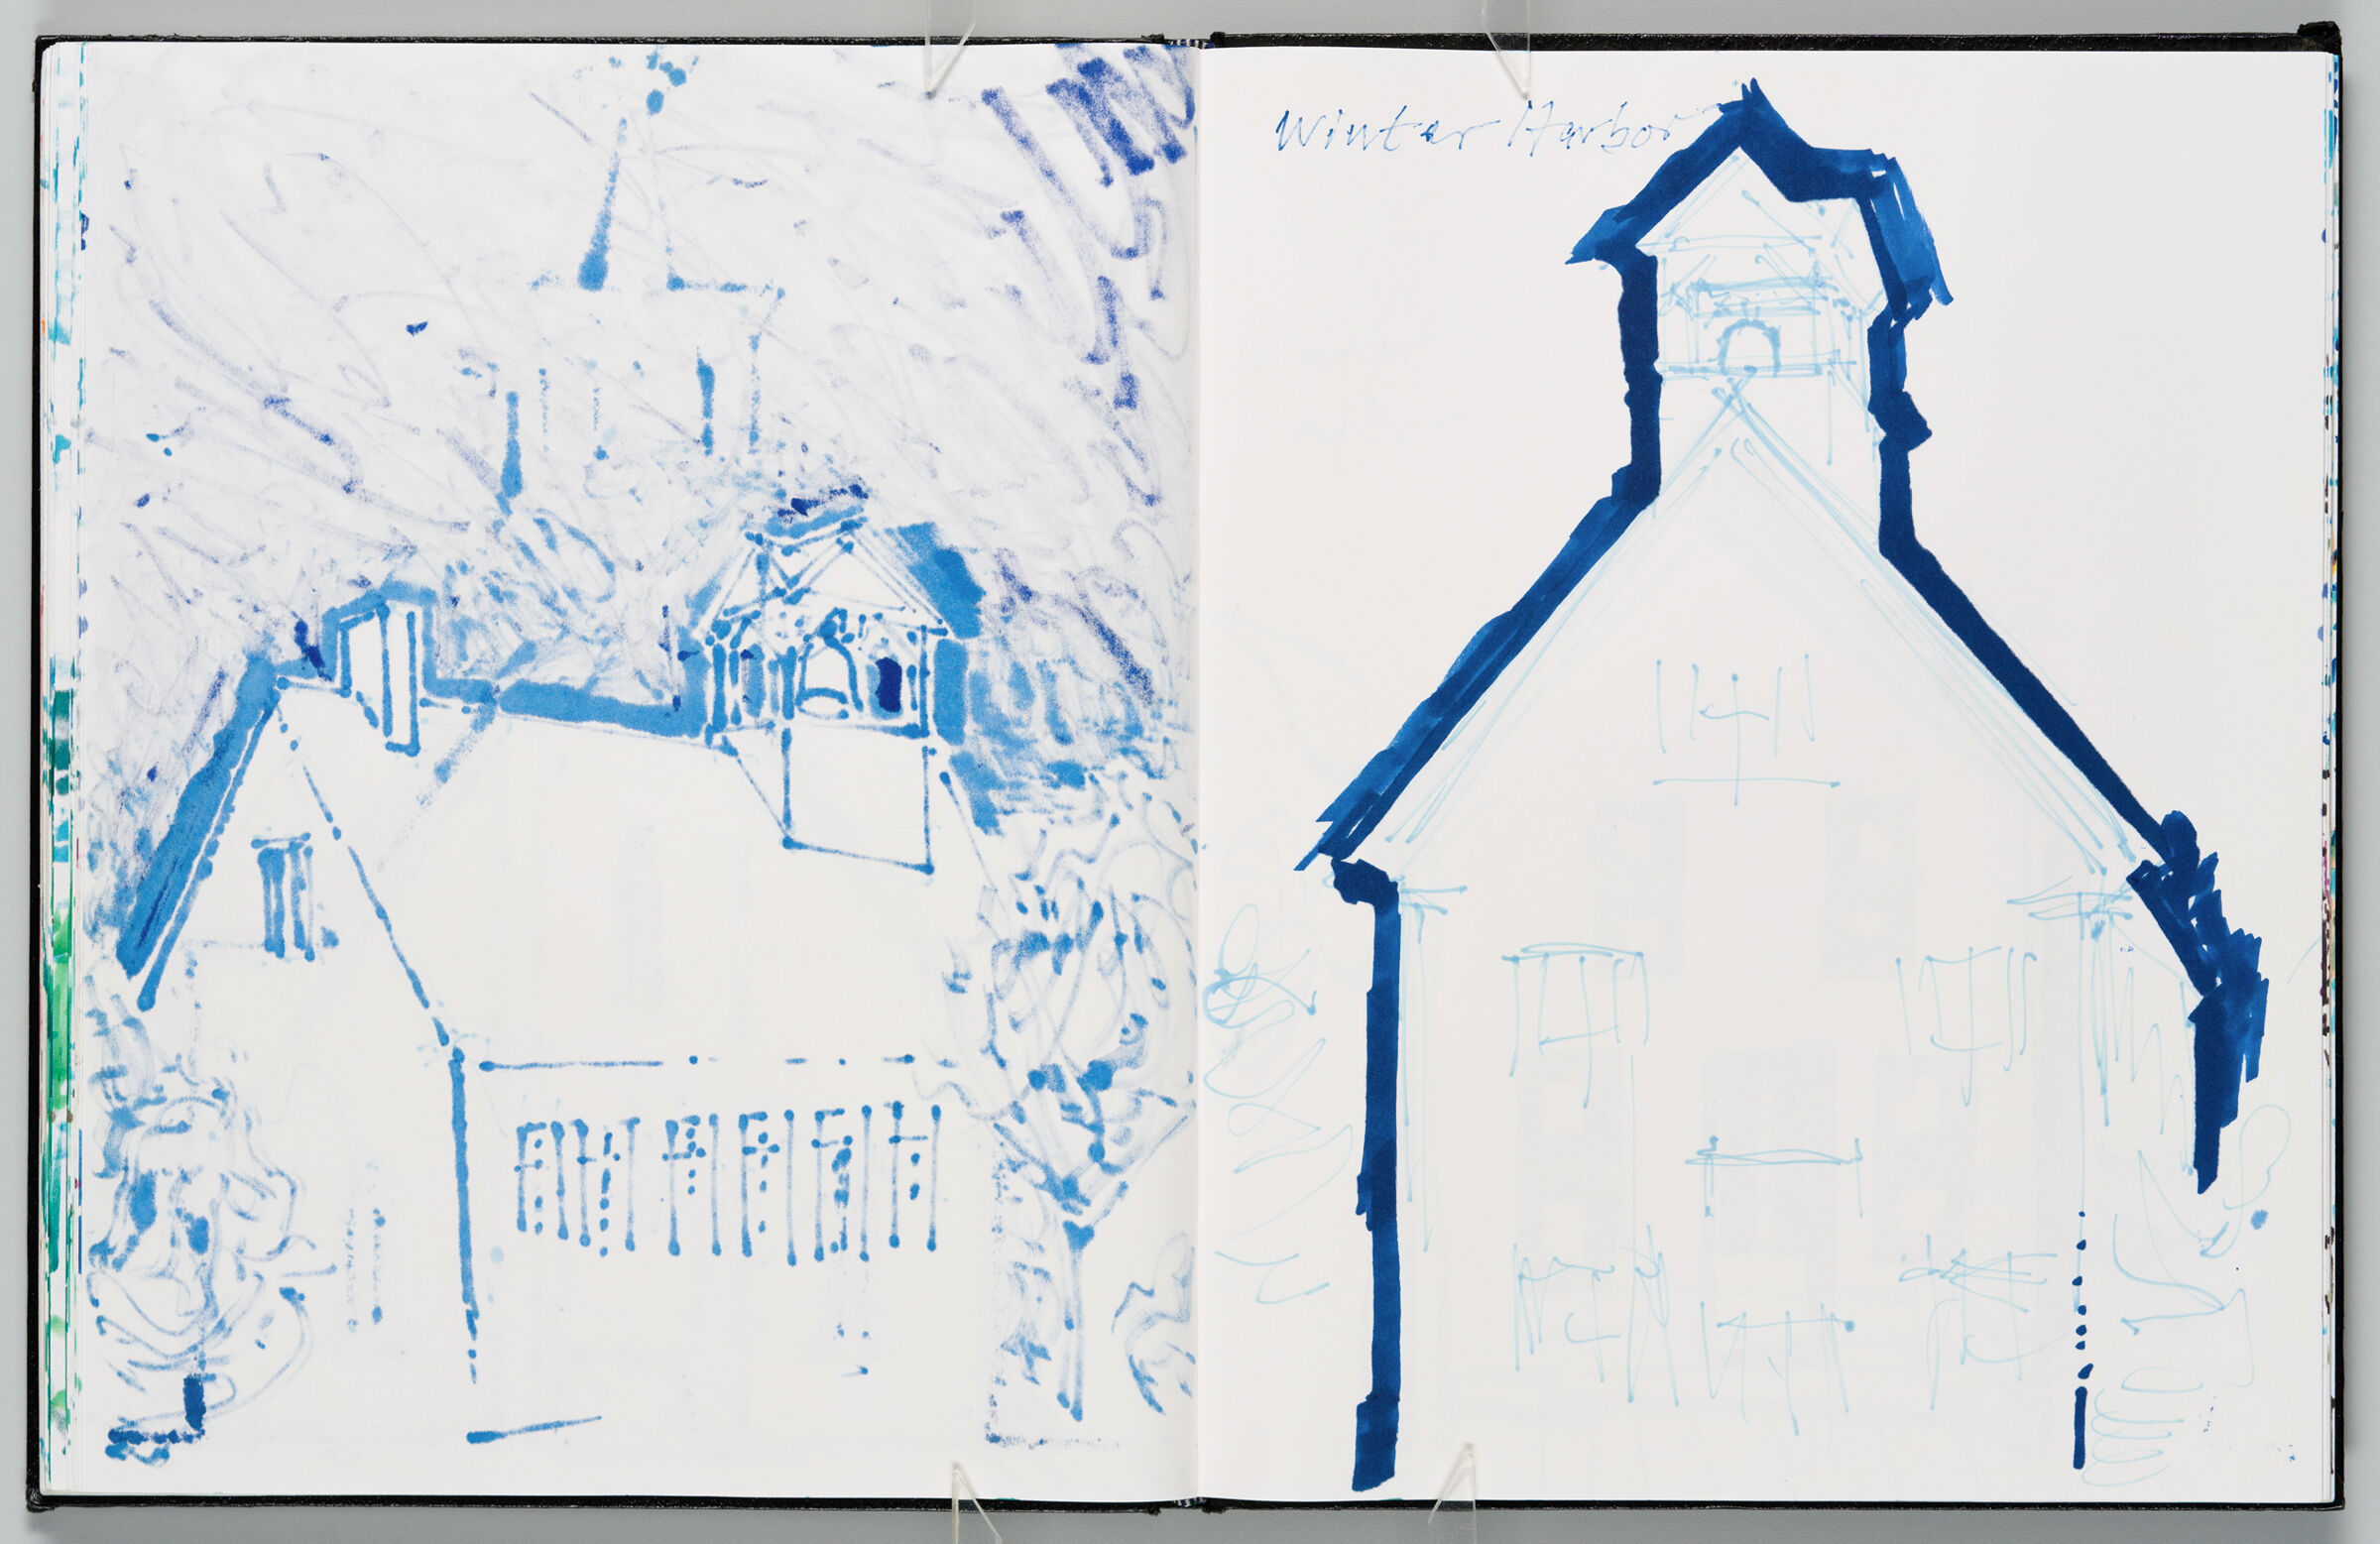 Untitled (Bleed-Through From Previous Page, Left Page); Untitled (Church In Winter Harbor, Right Page)